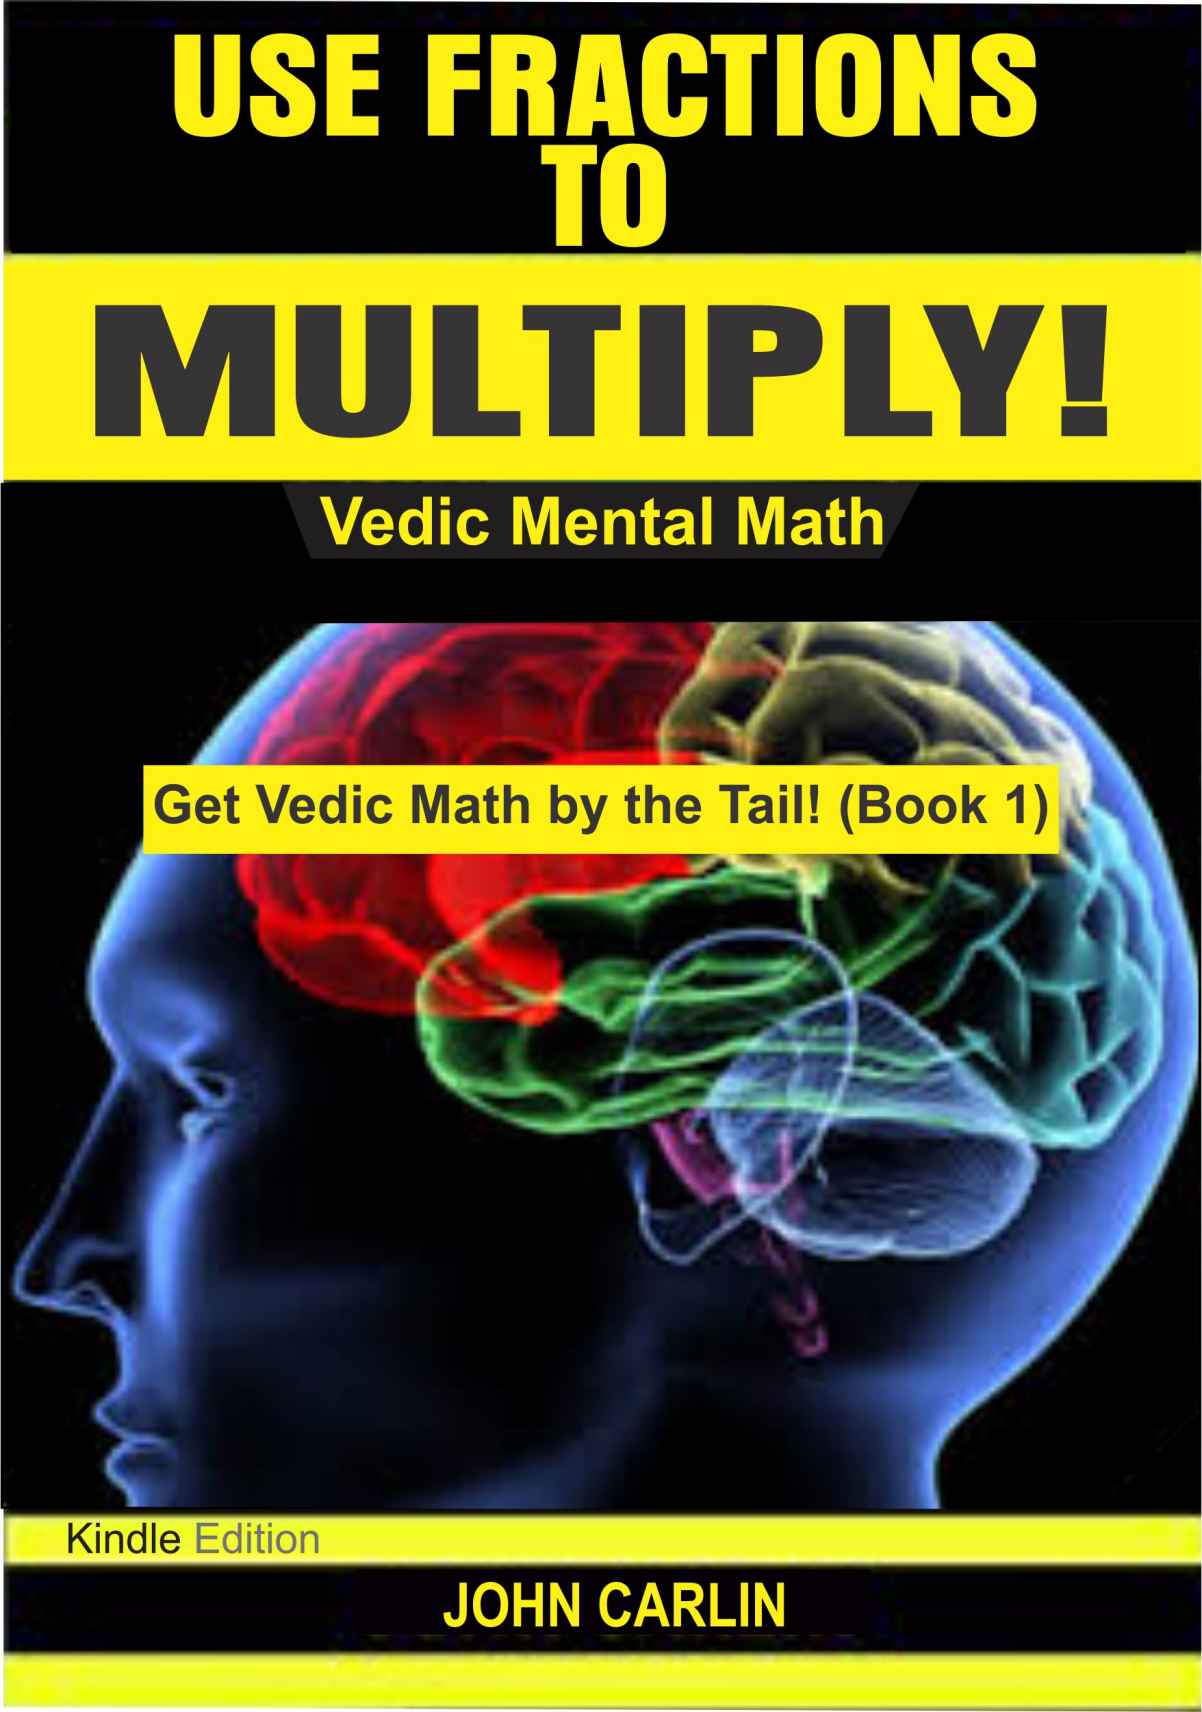 Use Fractions to Multiply! - Vedic Maths - John Carlin [PDF]